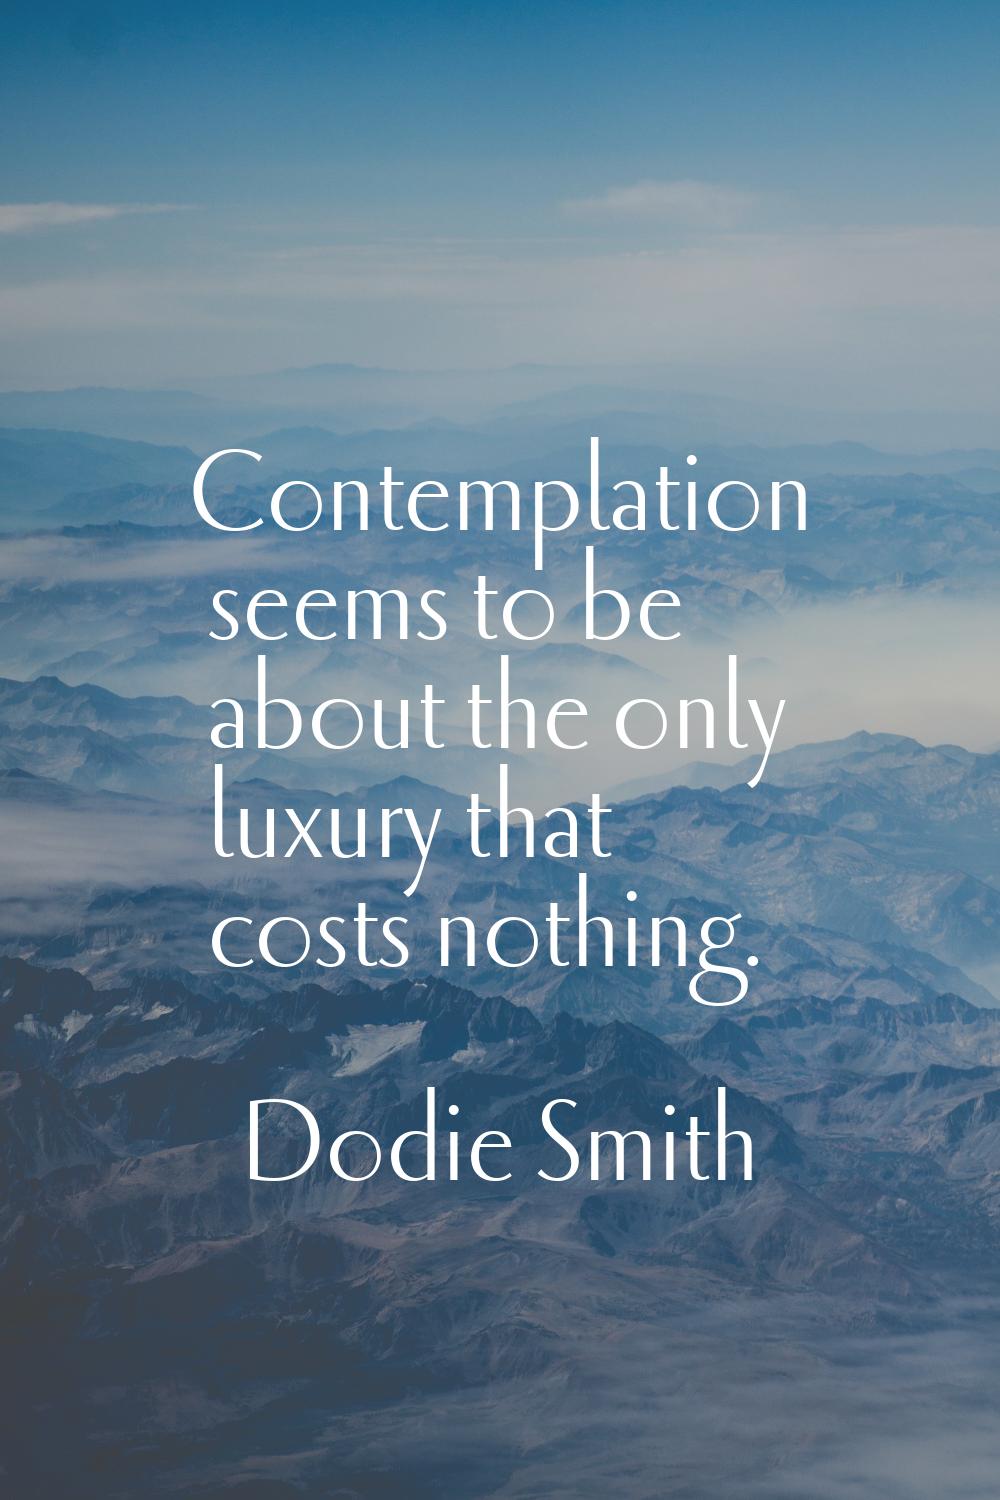 Contemplation seems to be about the only luxury that costs nothing.